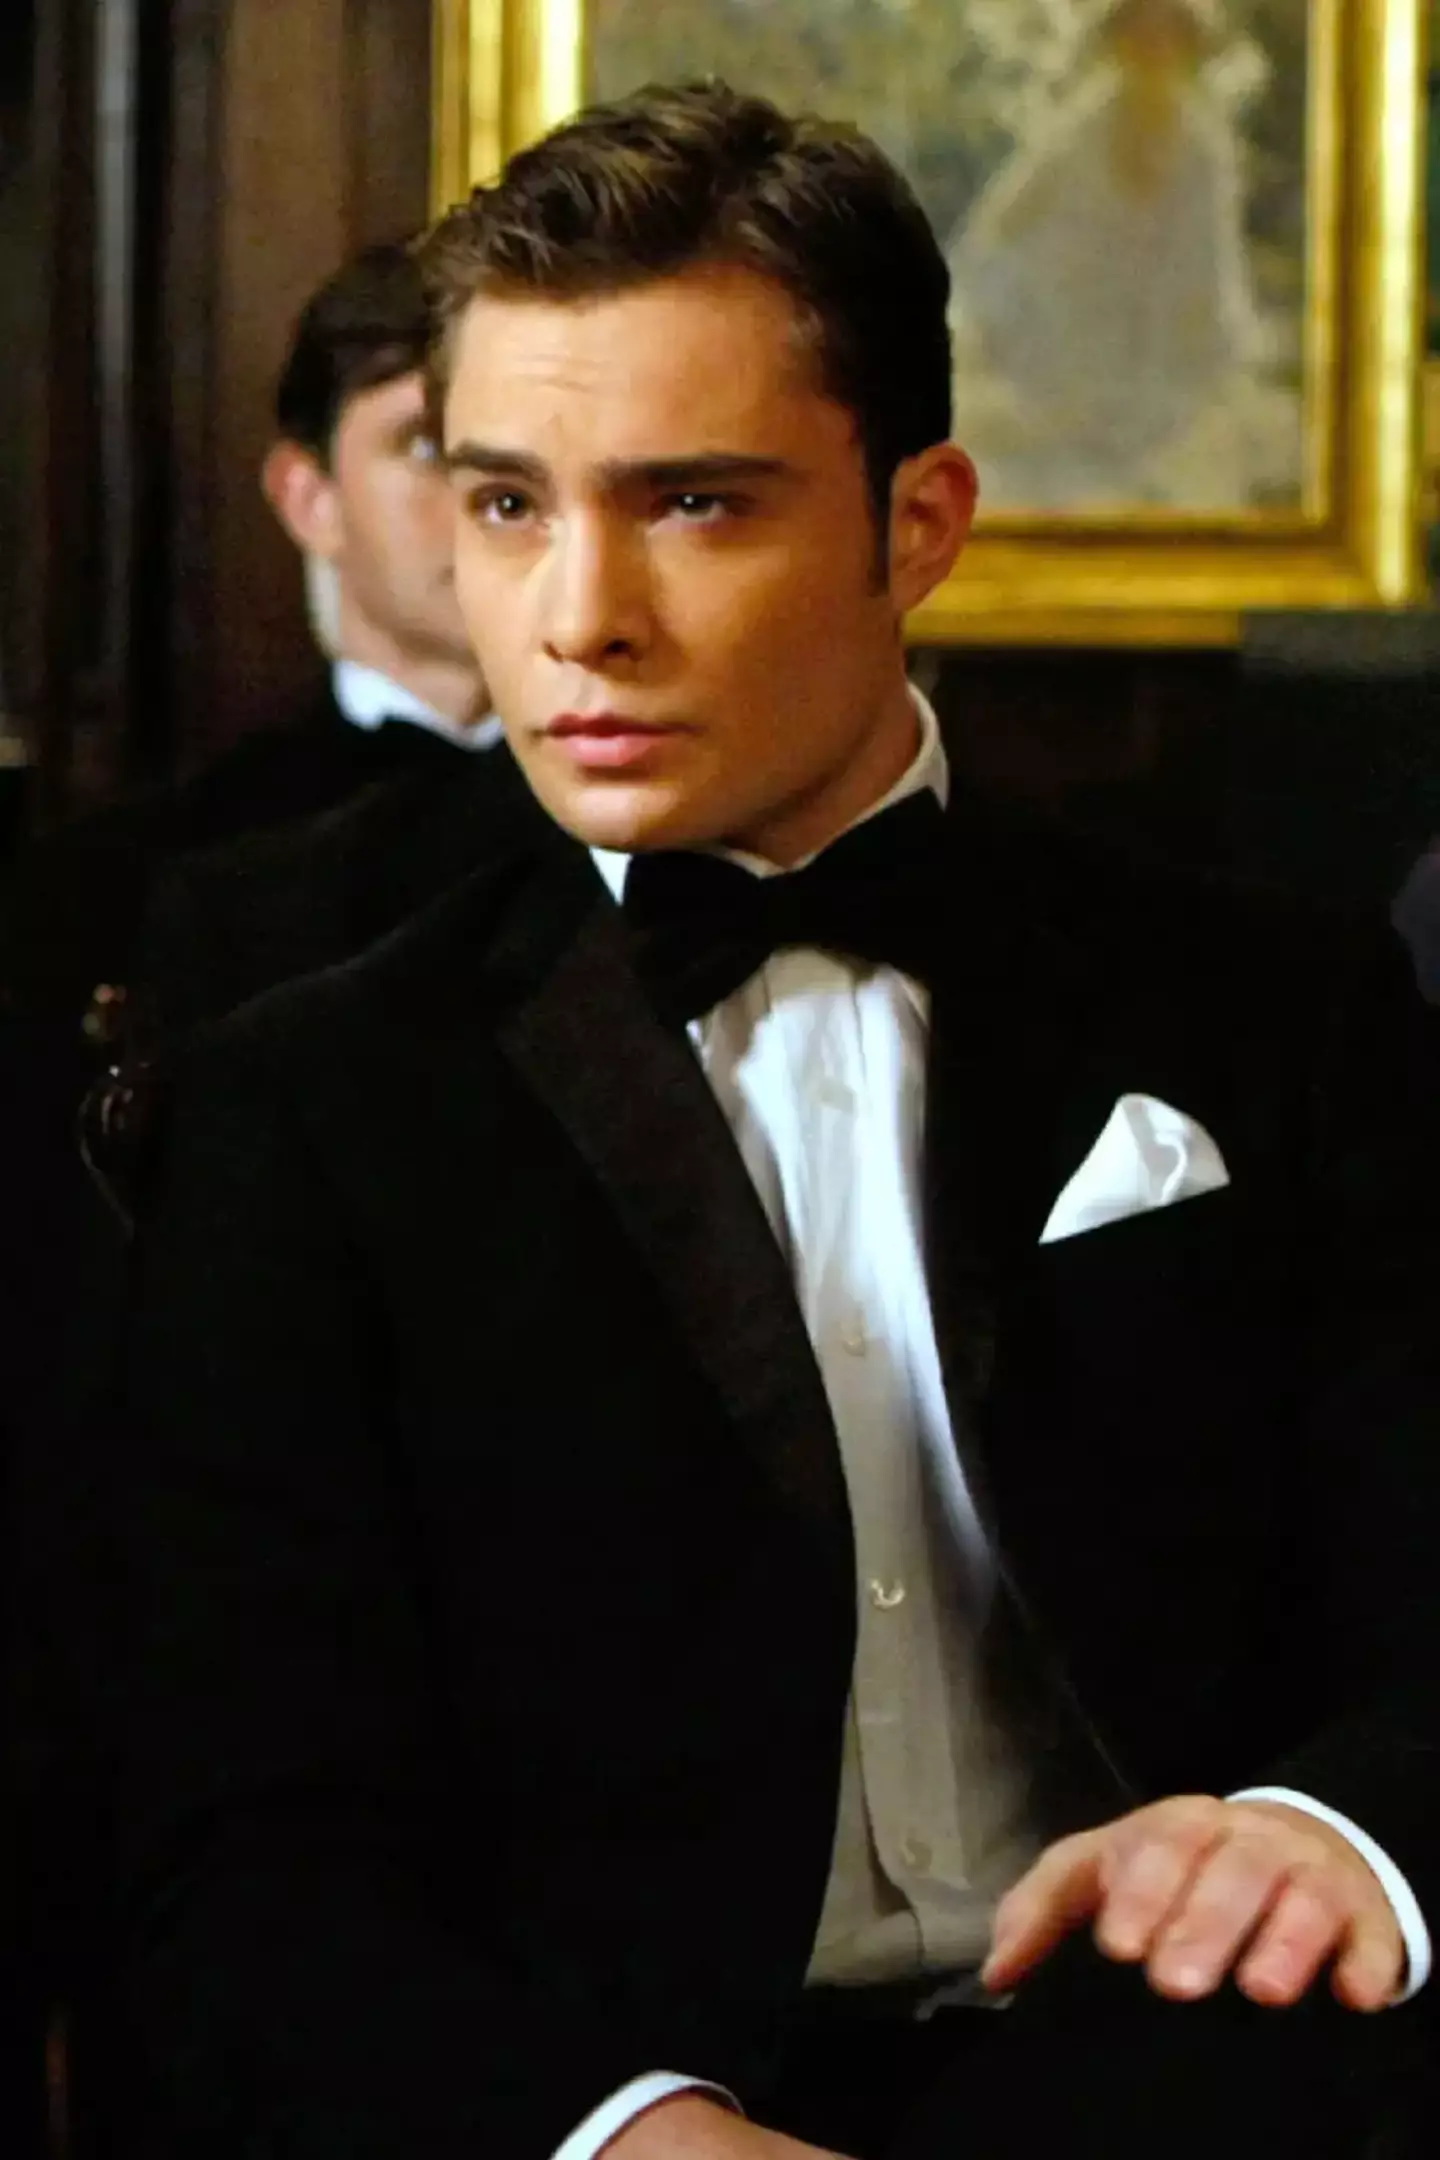 Gossip Girl's Chuck Bass is arguably one of the most famed narcissists on TV.